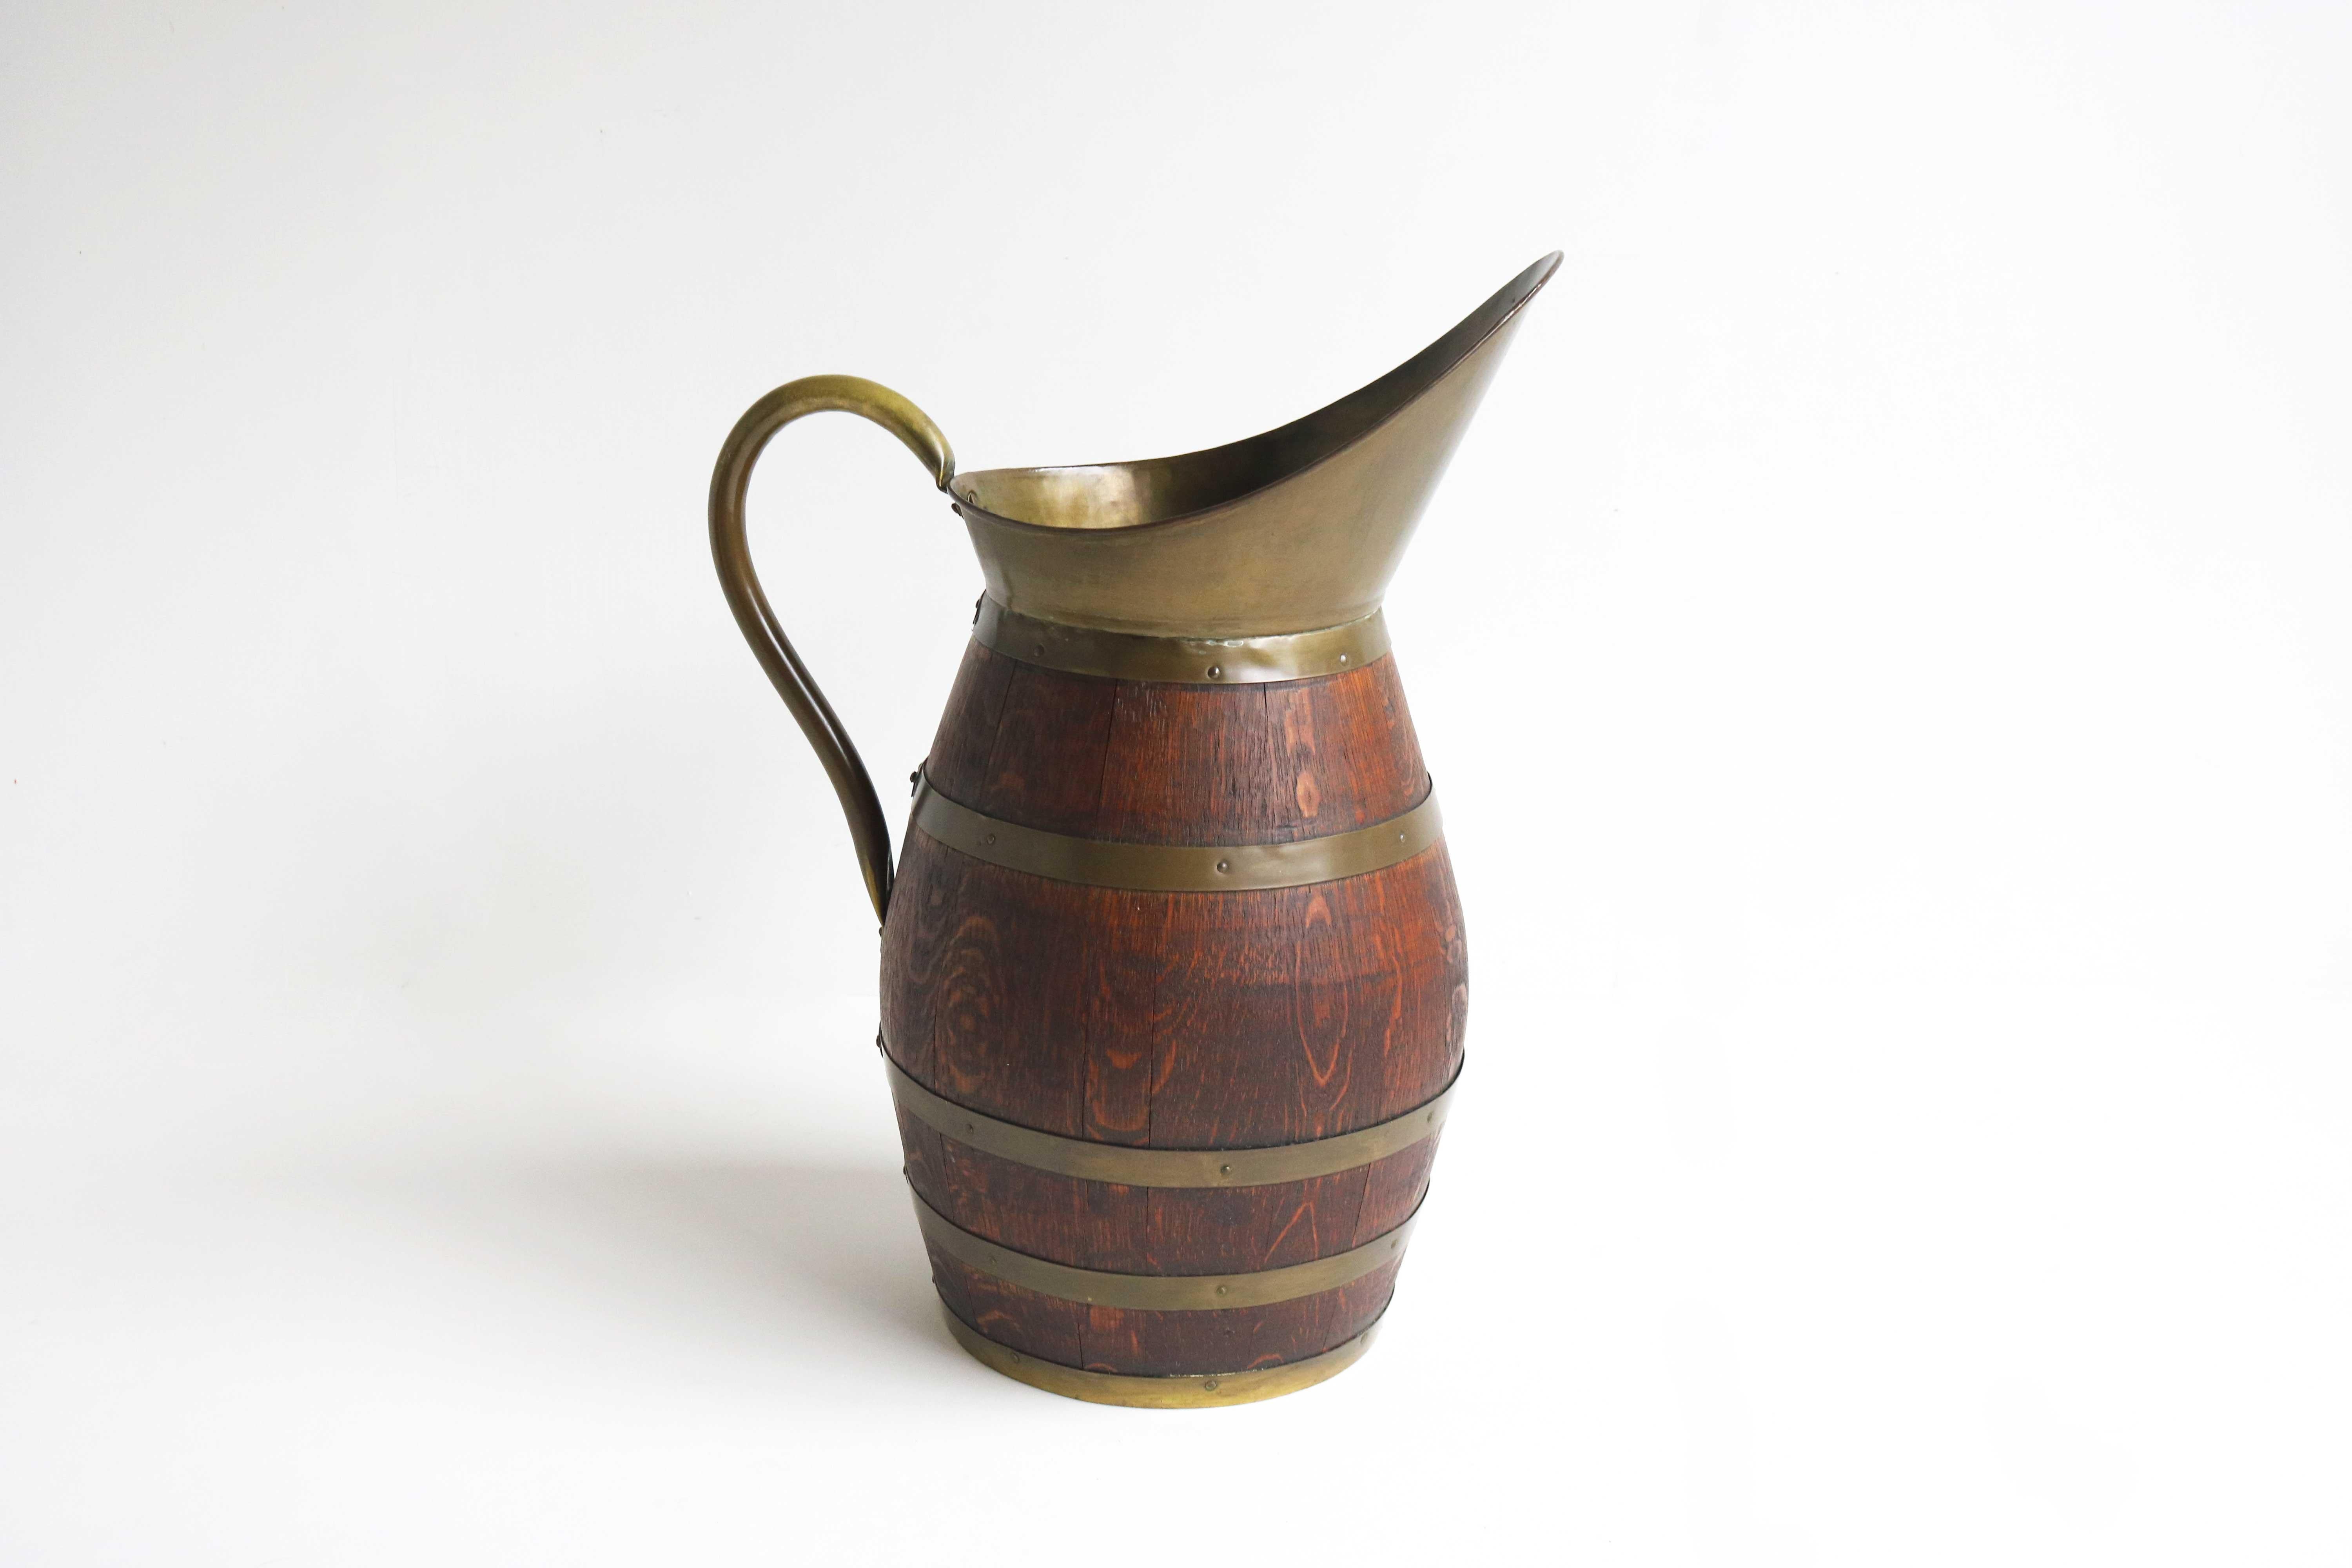 Antique French Copper and Oak Pitcher, Wine Jug Umbrella Holder 1900

Beautiful 19th century rustic French oak and copper banded handmade cider pitcher , from Normandy
Accessorize your wine cellar , kitchen , dining room or entryway with this